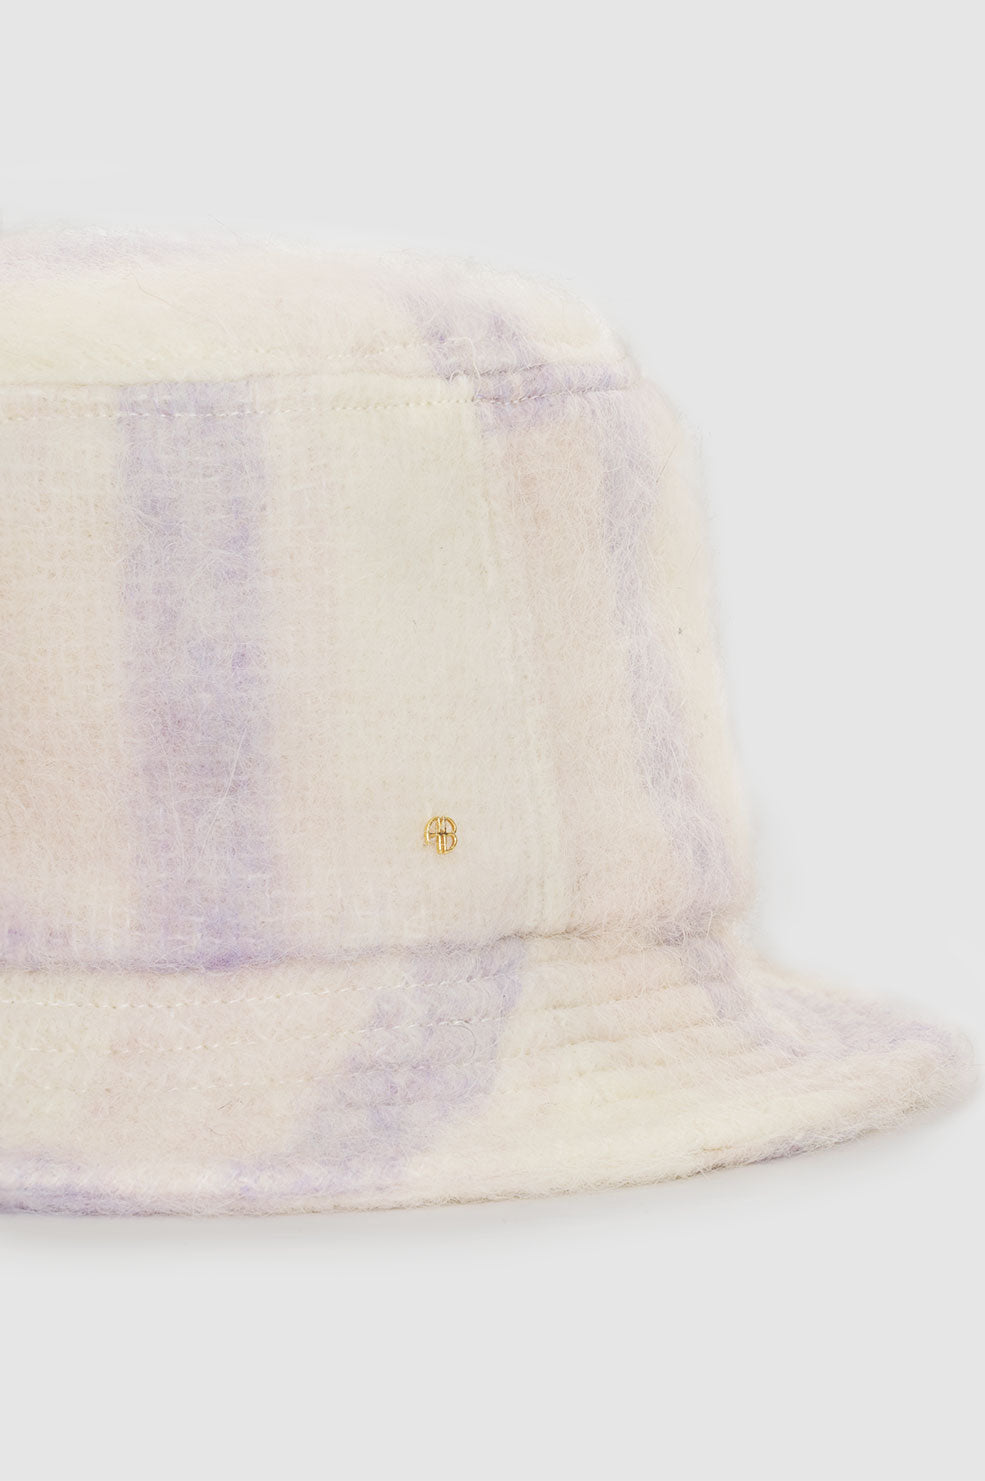 Cami Bucket Hat - Lavender And Cream Check - Detail View